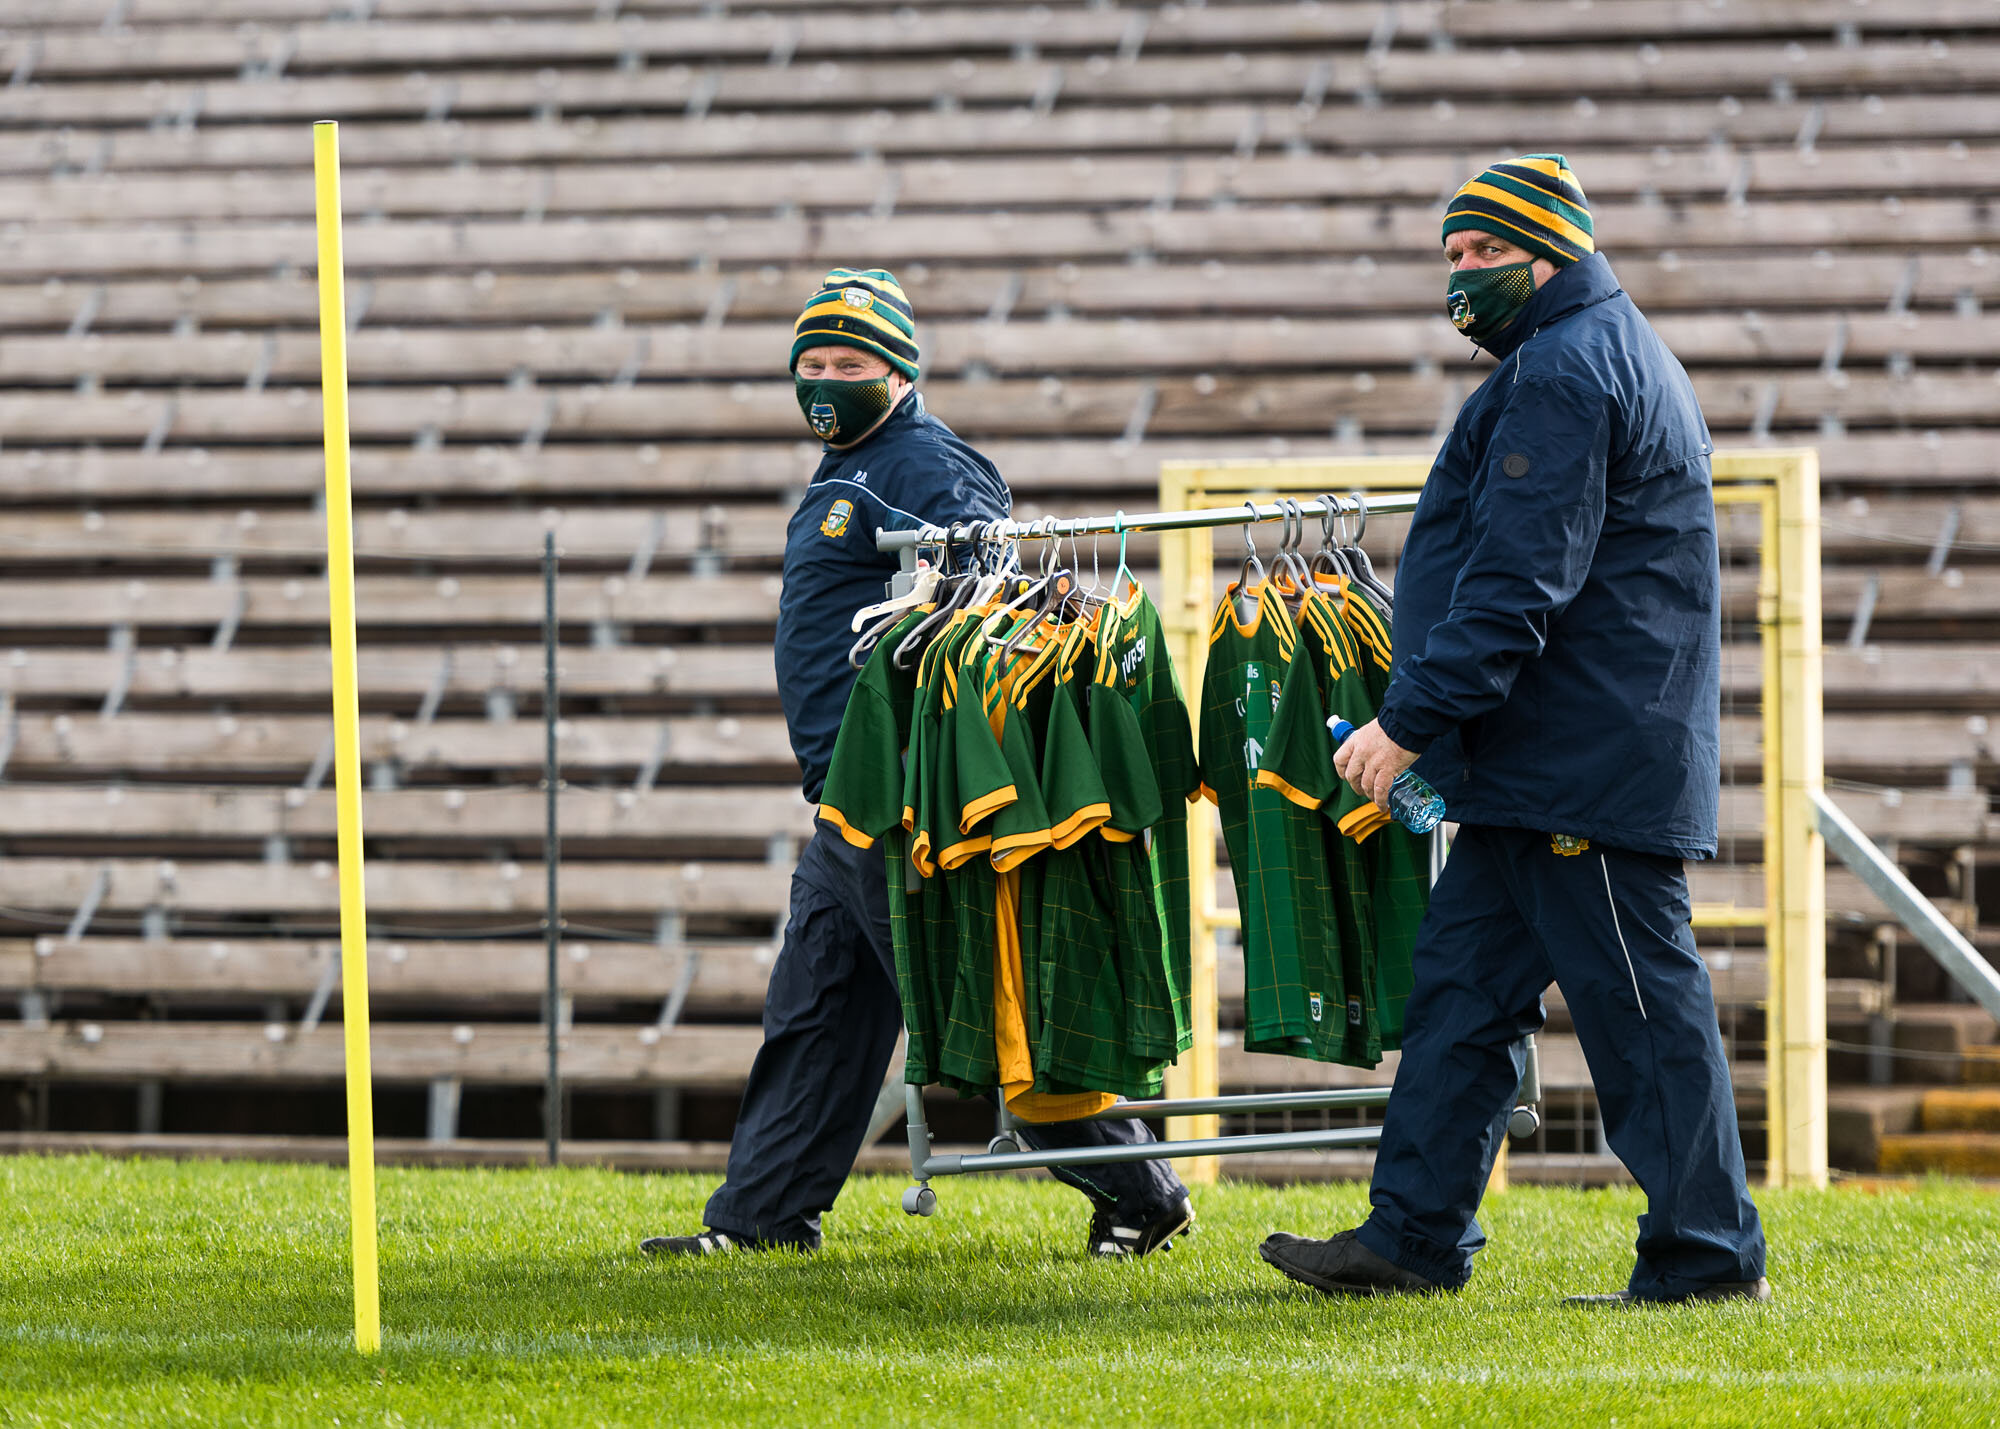 Paddy Doyle (Meath Legend / Kitman) arranges suitable attire for the Meath Senior Players before taking on Monaghan - Div 1 League Final Game